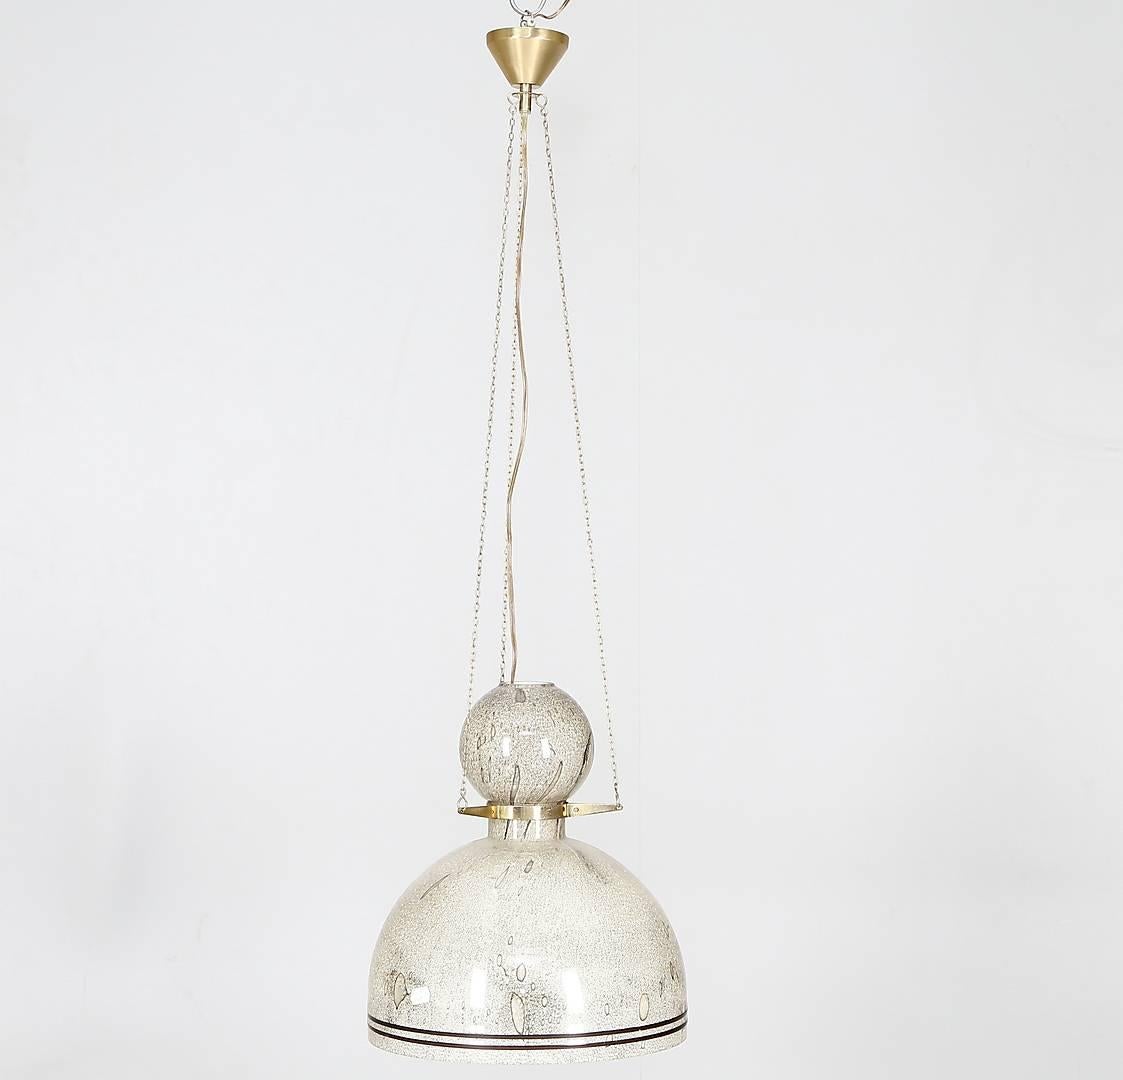 A pair of large, hand-blowing glass pendants designed by Wiktor Bernd for Flygsfors, Sweden, circa 1960.
Glass shade on brass hardware with single, Edison style socket.
Existing wiring, rewiring available upon request.